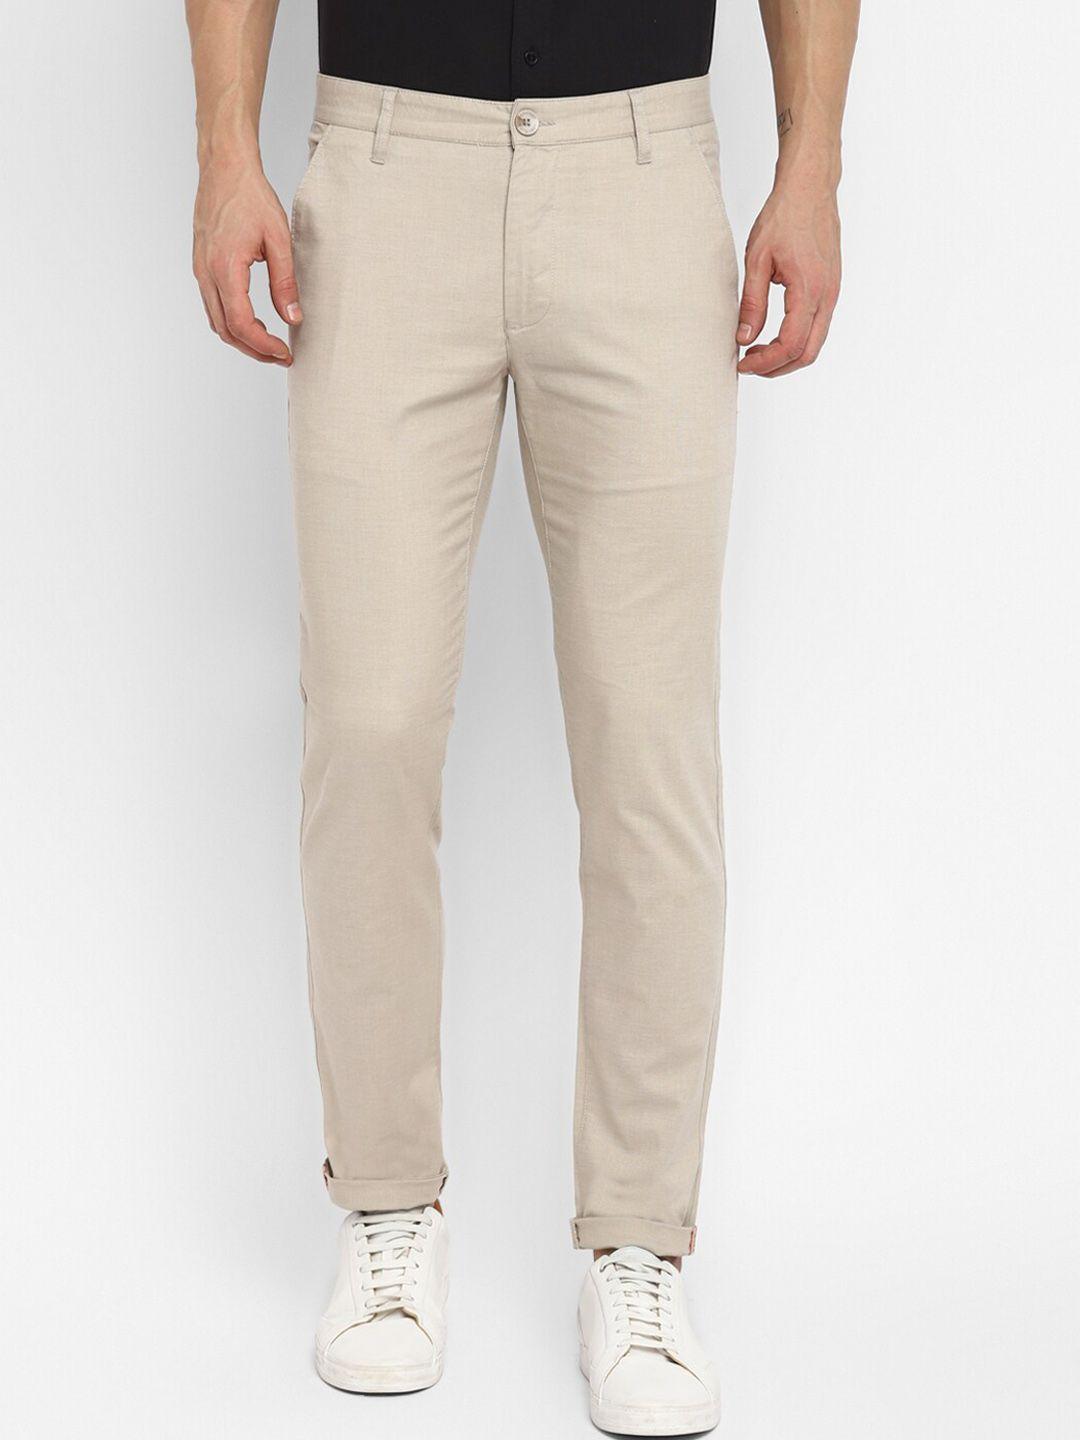 red-chief-men-cream-coloured-trousers